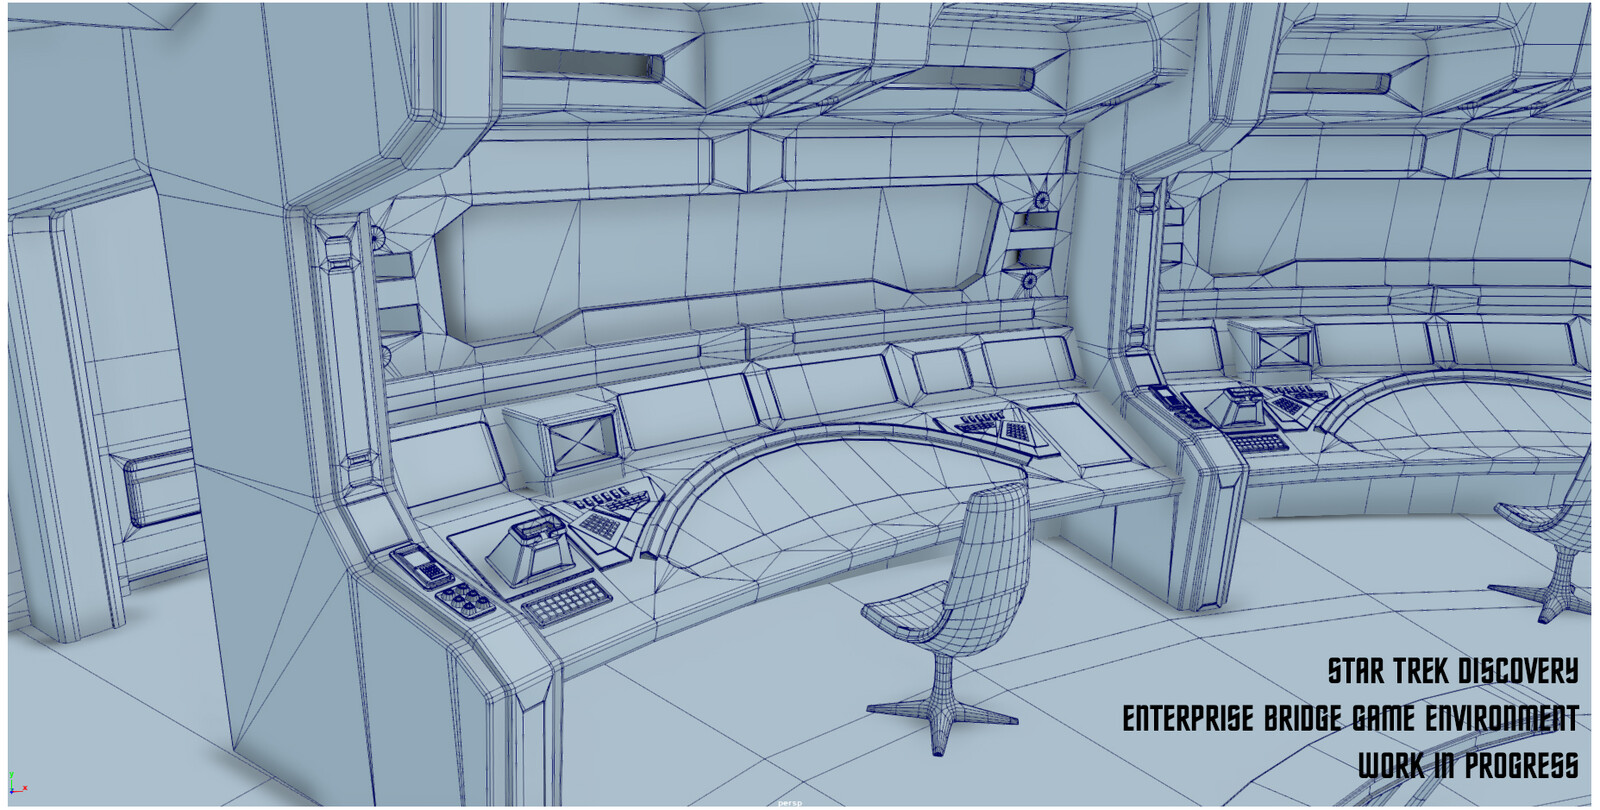 I am currently recreating the re-imagined USS NCC-1701Enterprise bridge captained by Christopher Pike from Star Trek Discovery as a real-time environment. (Hence the triangles, CG friends!) I am currently working on texturing and lighting the environment 